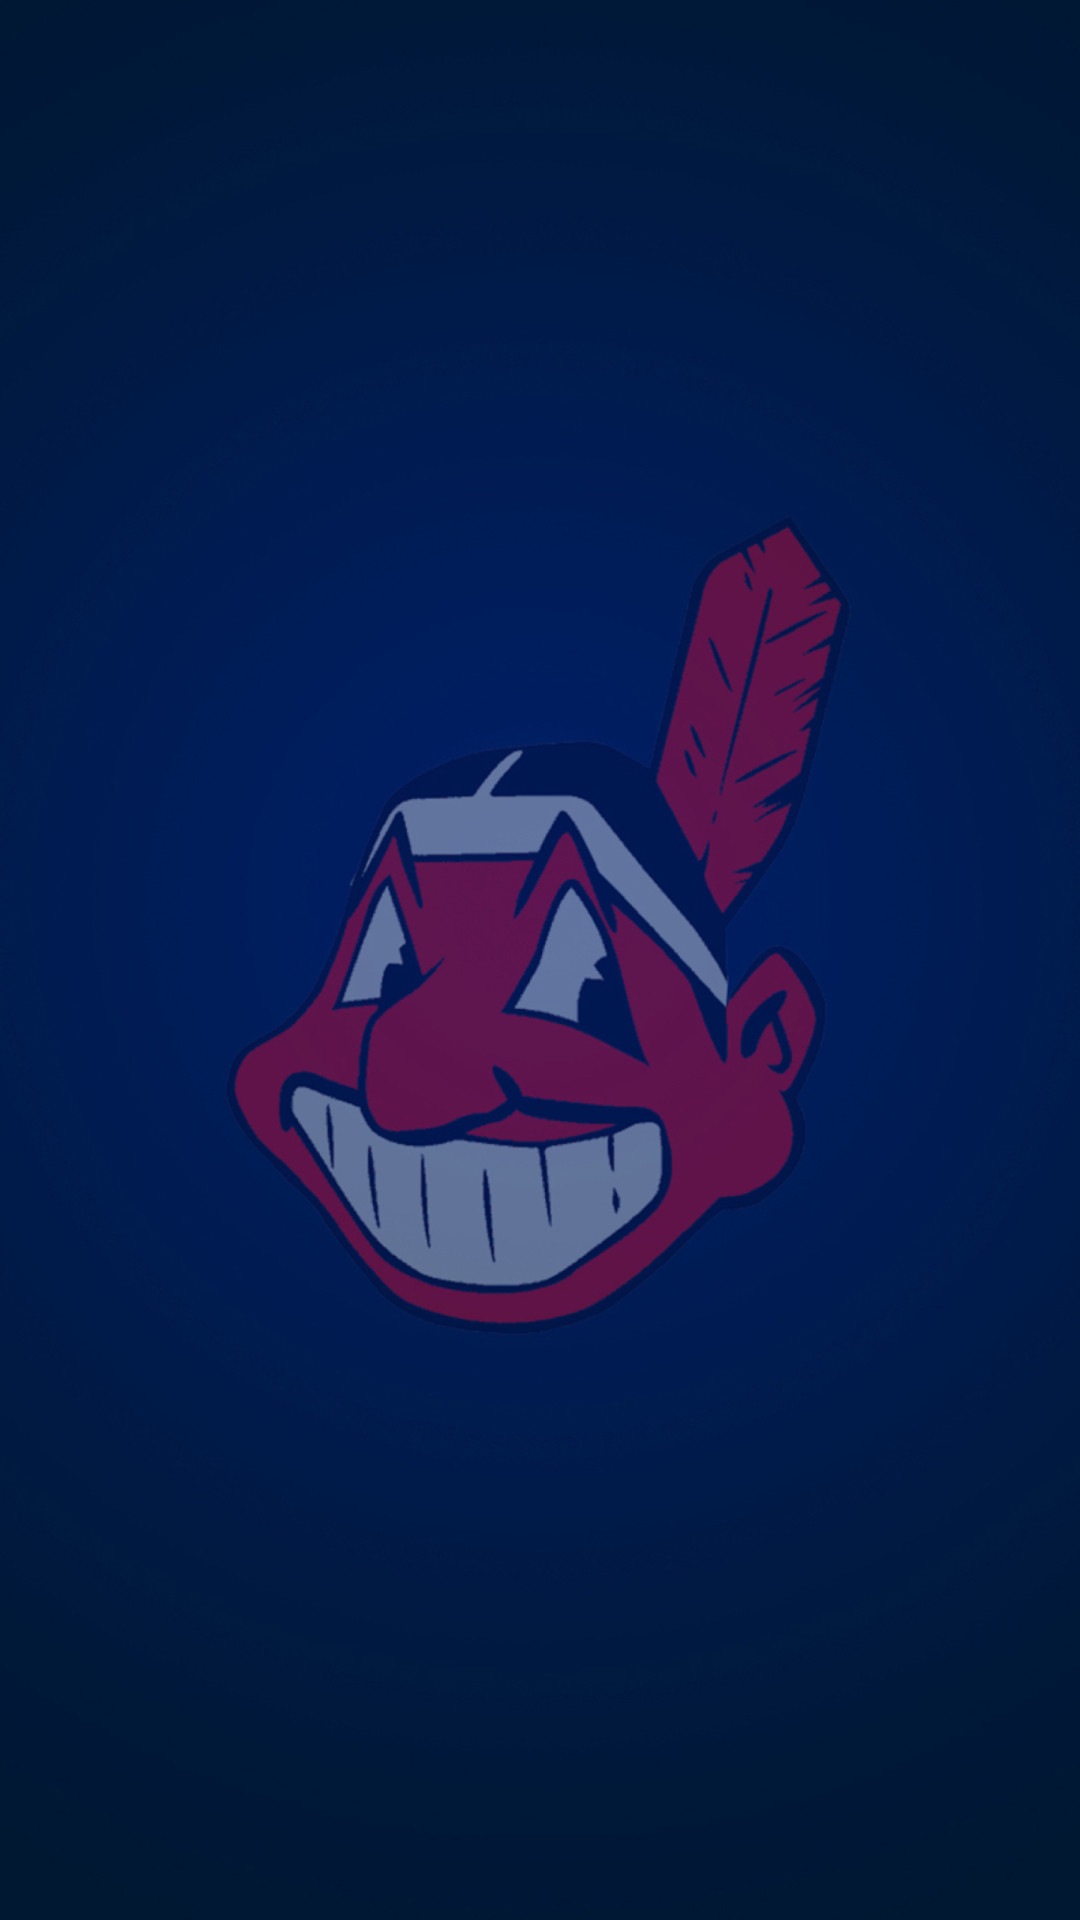 1080x1920 Cleveland Script and Skyline iPhone background Cleveland Indians | HD  Wallpapers | Pinterest | Cleveland, Hd wallpaper and Wallpaper